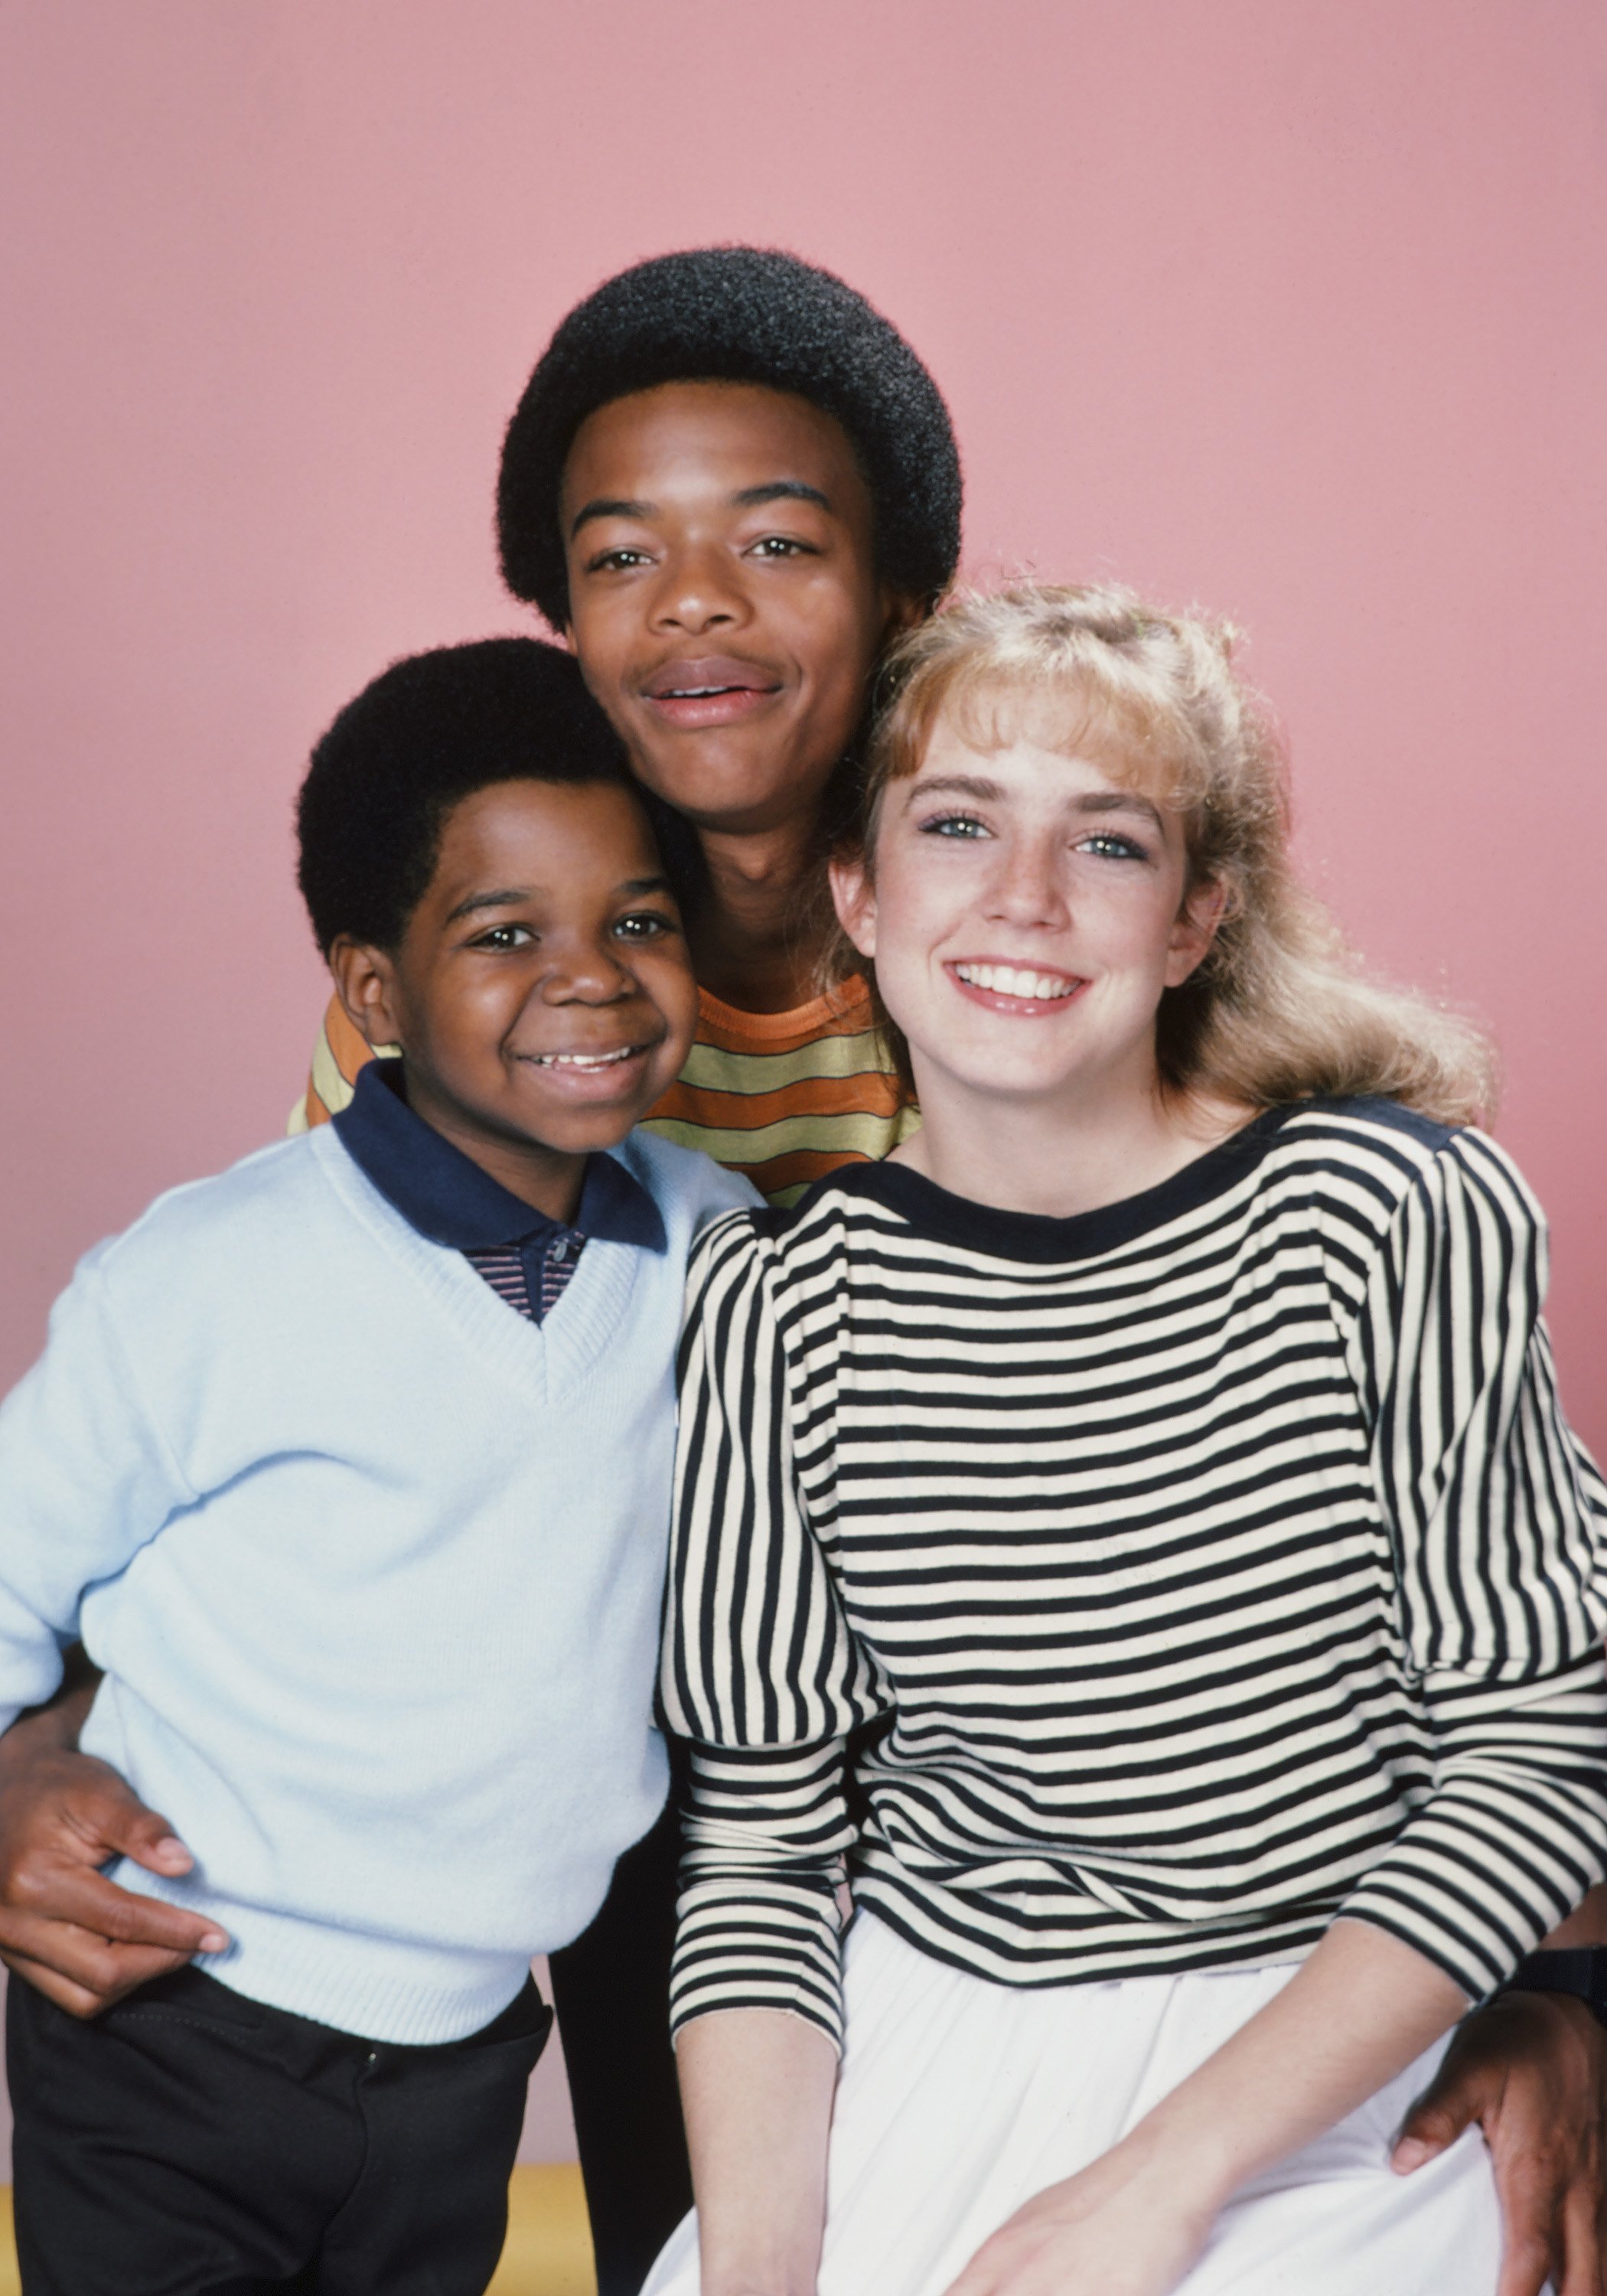 Gary Coleman as Arnold Jackson, Todd Bridges as Willis Jackson, and Dana Plato as Kimberly Drummond during "Diff'rent Strokes" Season 5. I Image: Getty Images. 